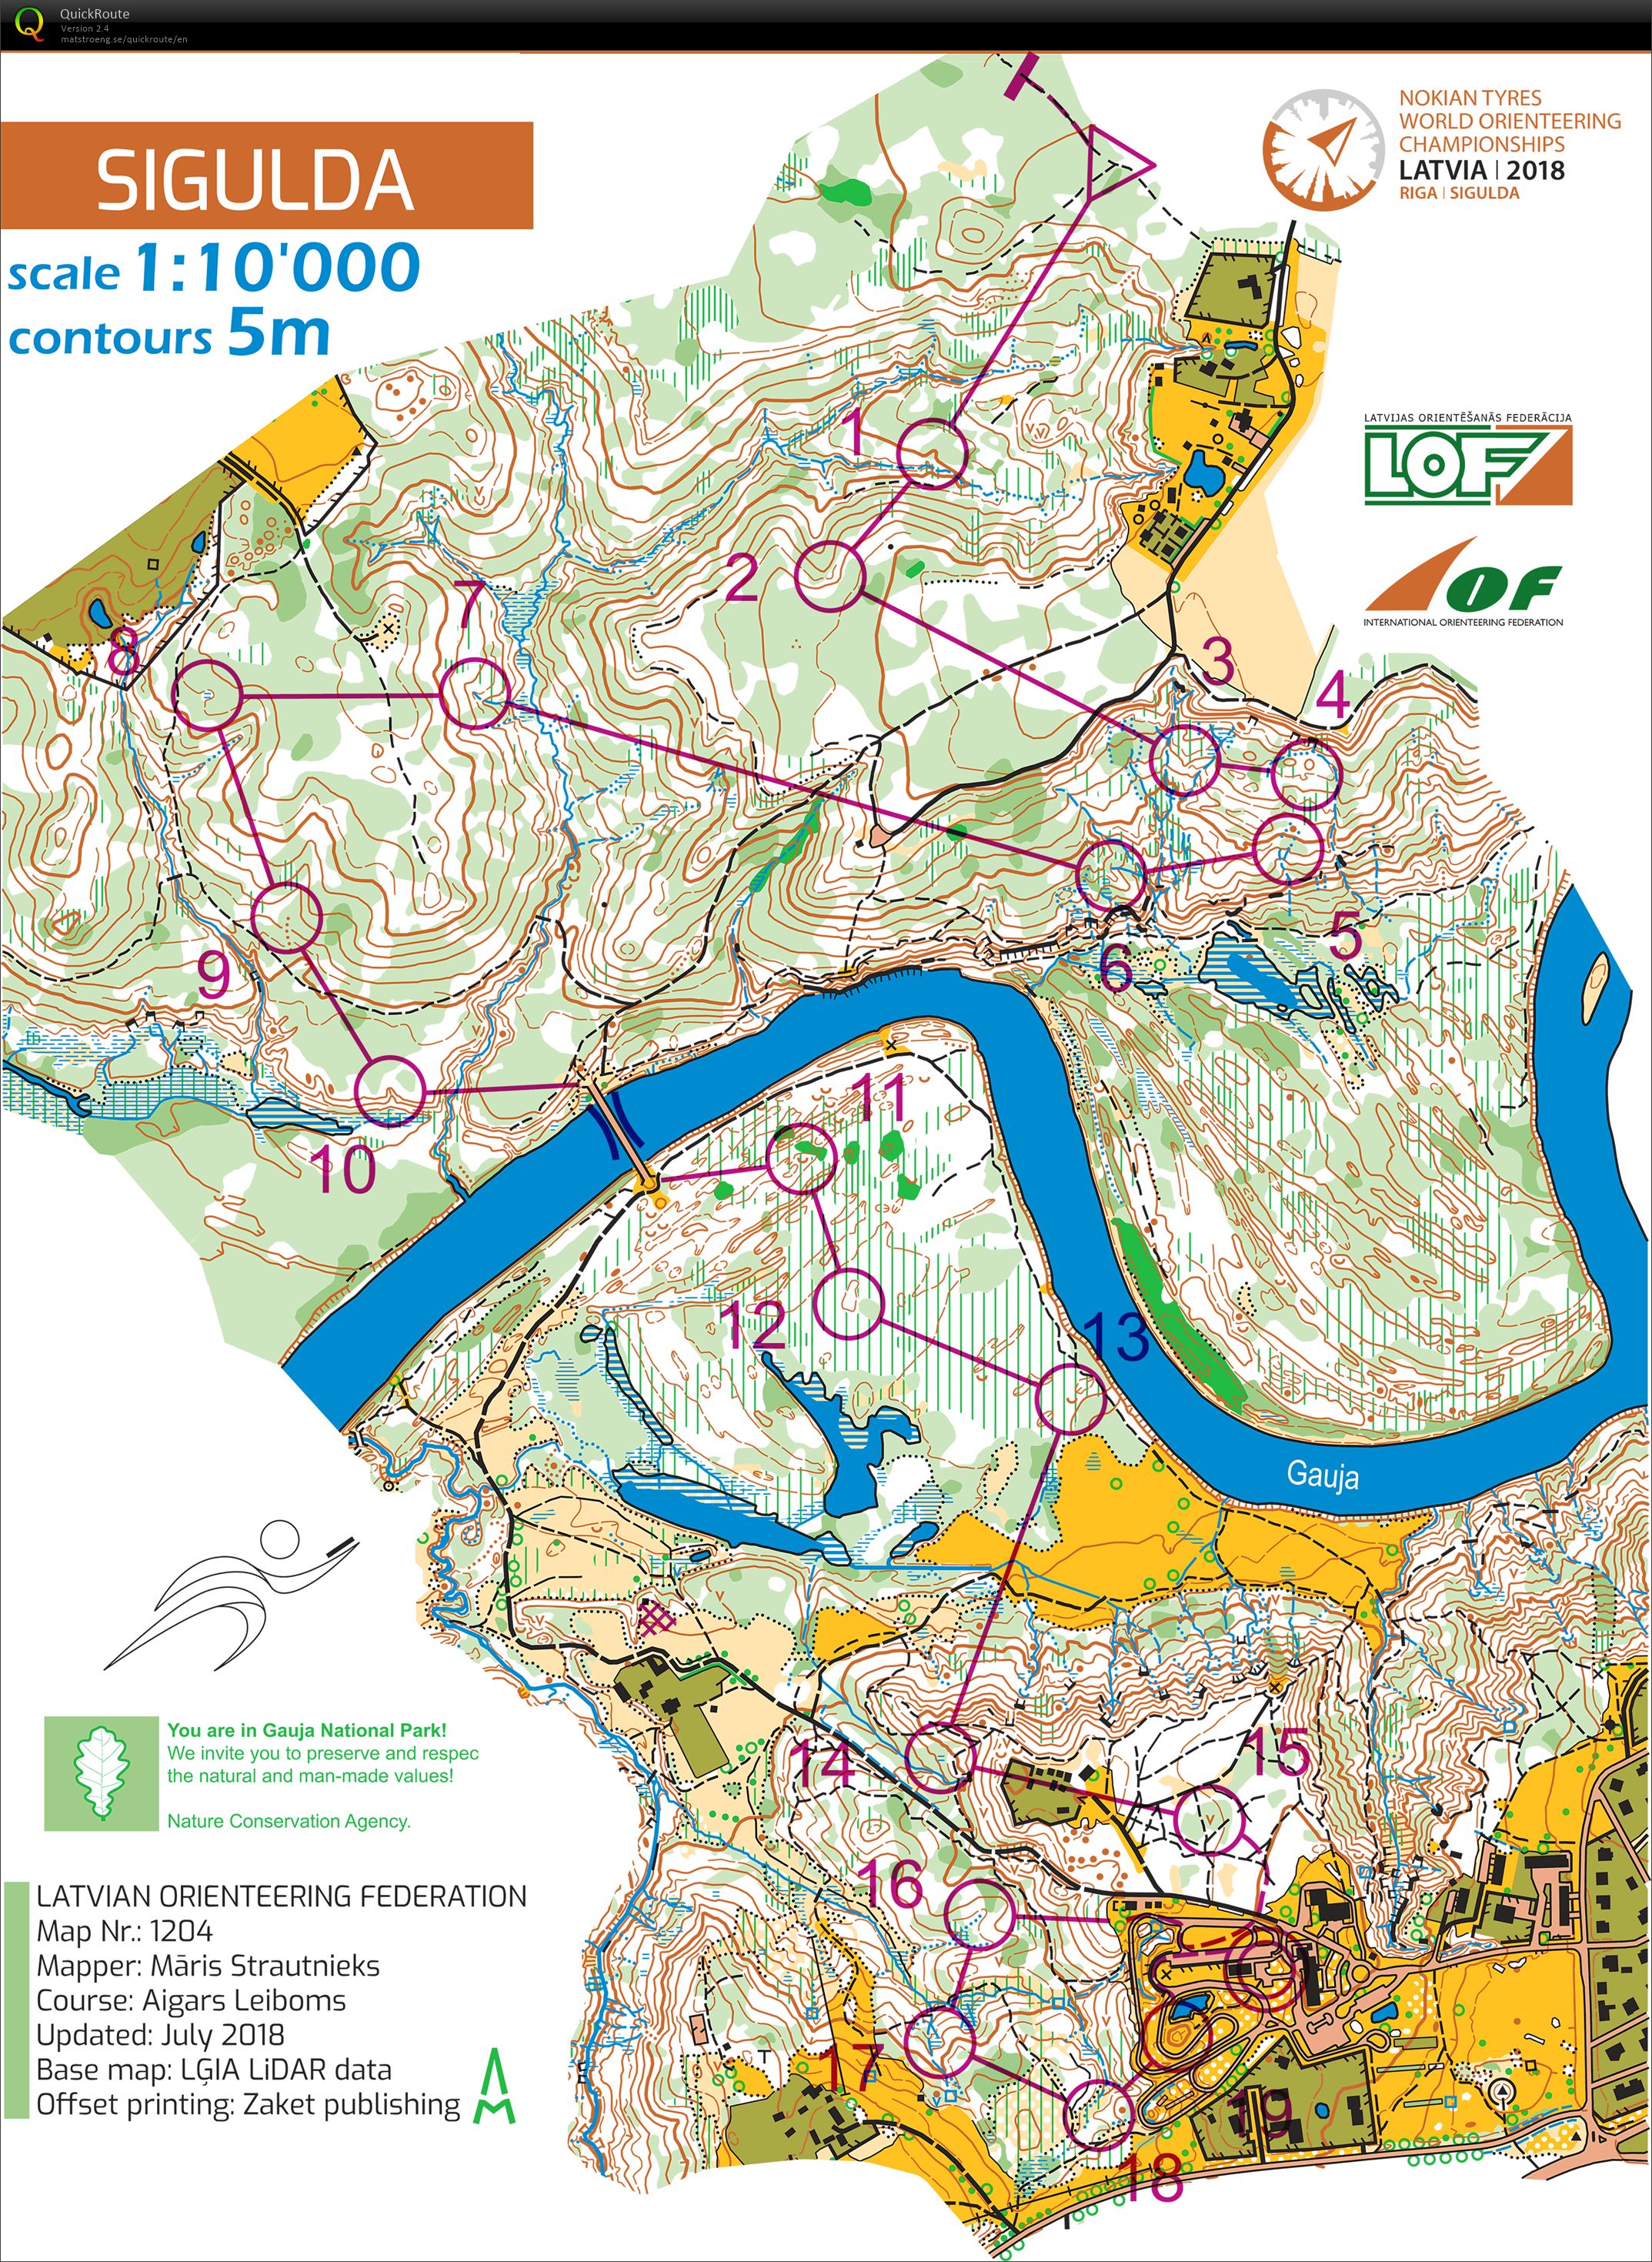 WOC 2018 Middle (2018-08-07)